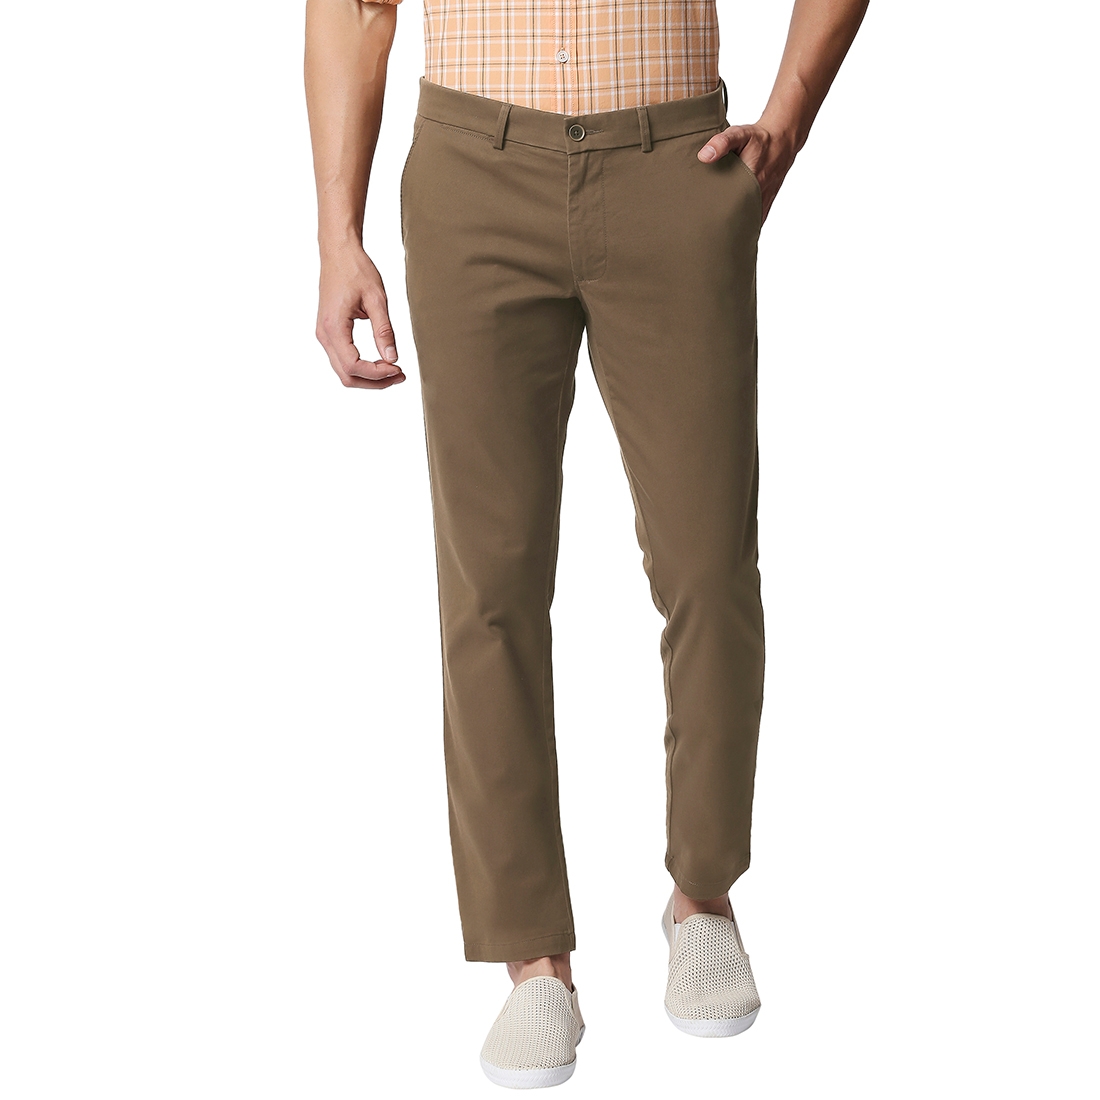 BASICS CASUAL PLAIN BROWN COTTON STRETCH TAPERED TROUSERS 